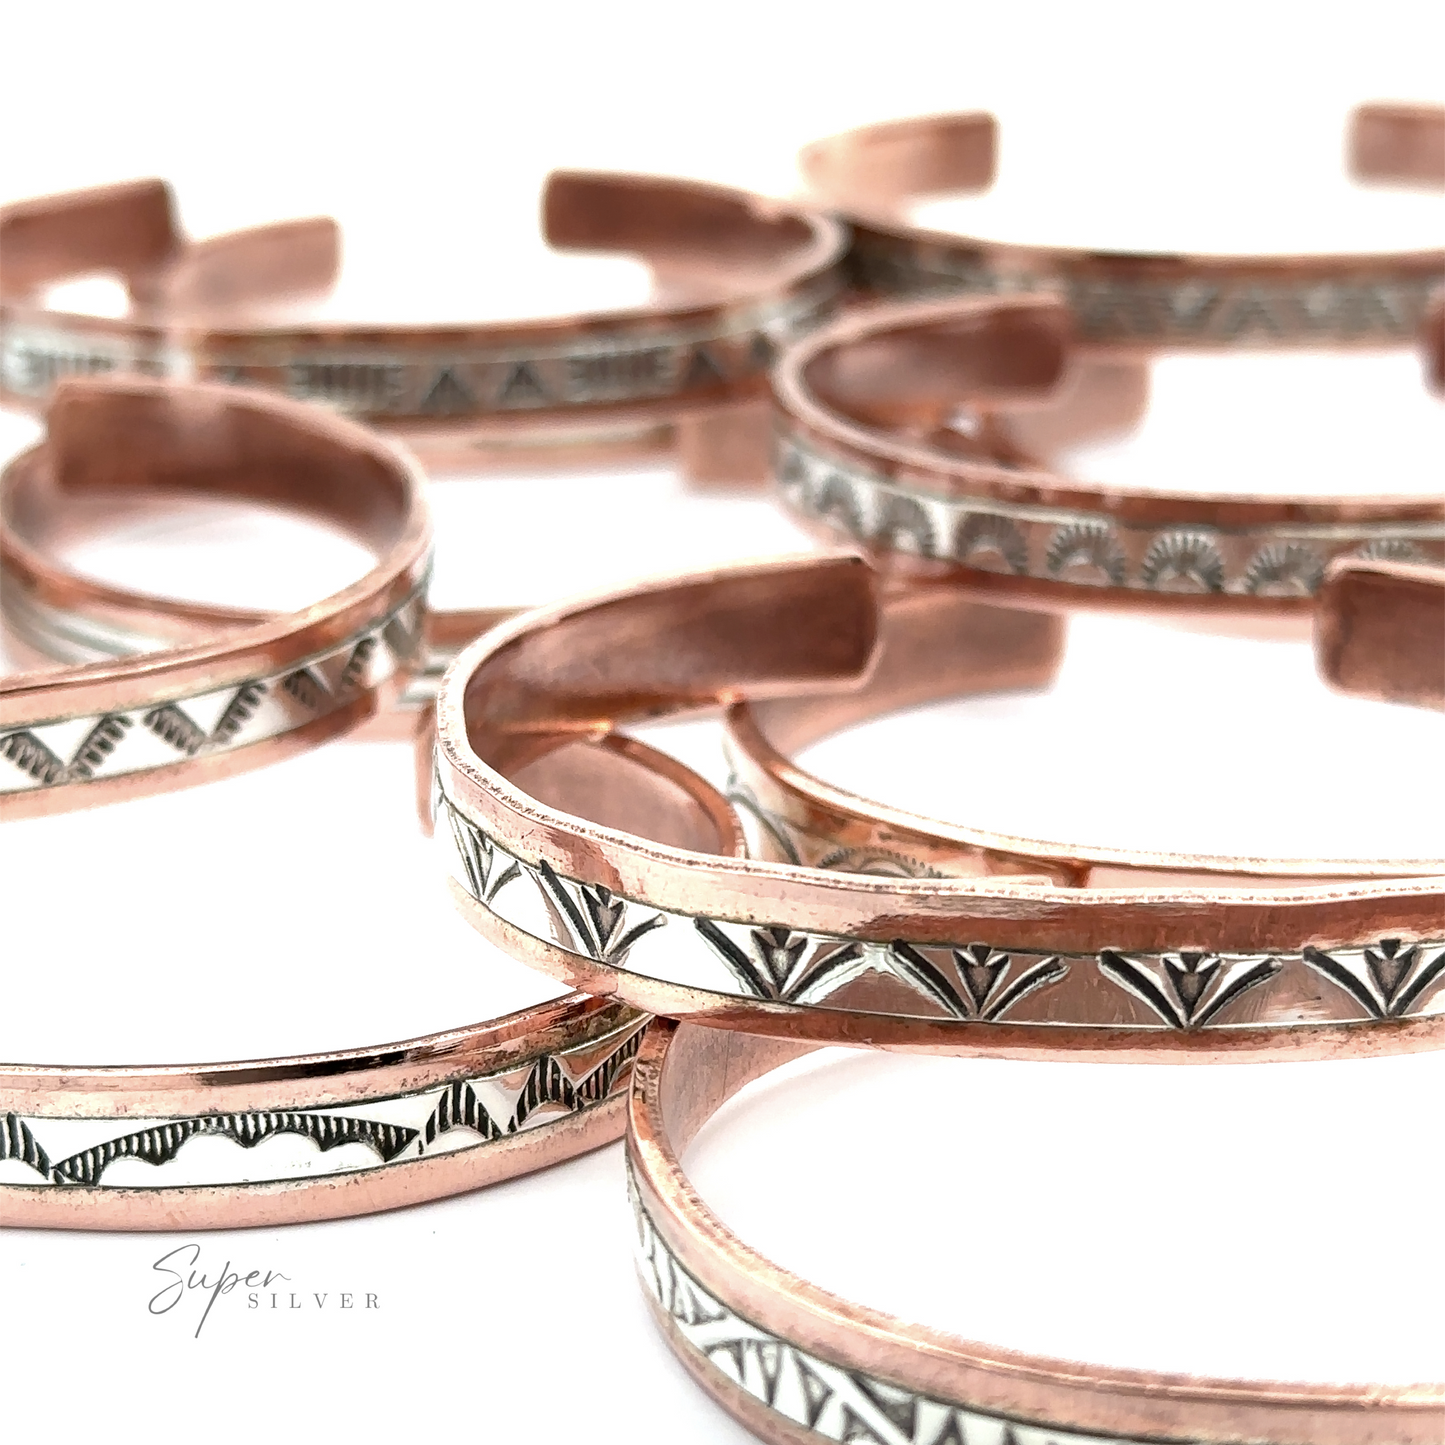 
                  
                    Close-up of several Native American Handmade Copper And Silver Bracelet with sterling silver geometric inlays, arranged in a layered fashion against a white background.
                  
                